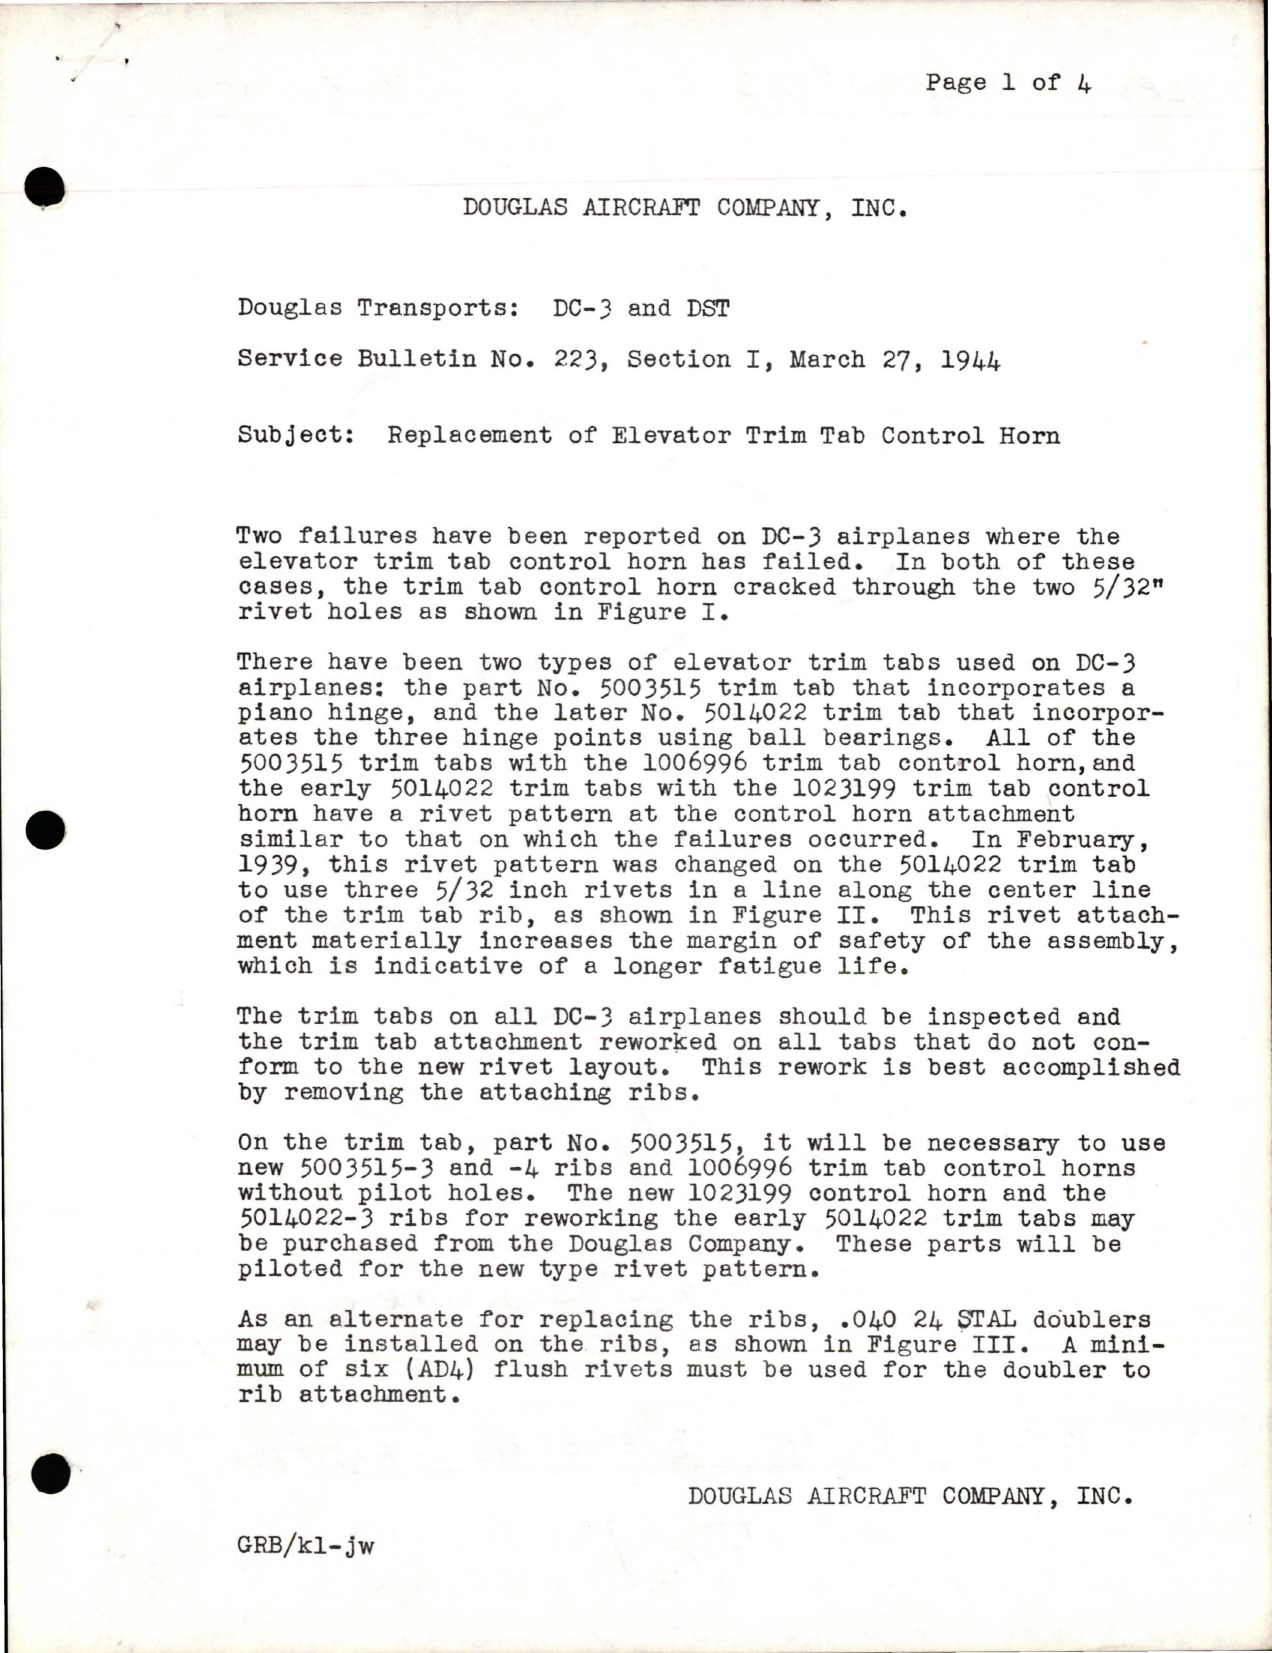 Sample page 1 from AirCorps Library document: Replacement of Elevator Trim Tab Control Horn